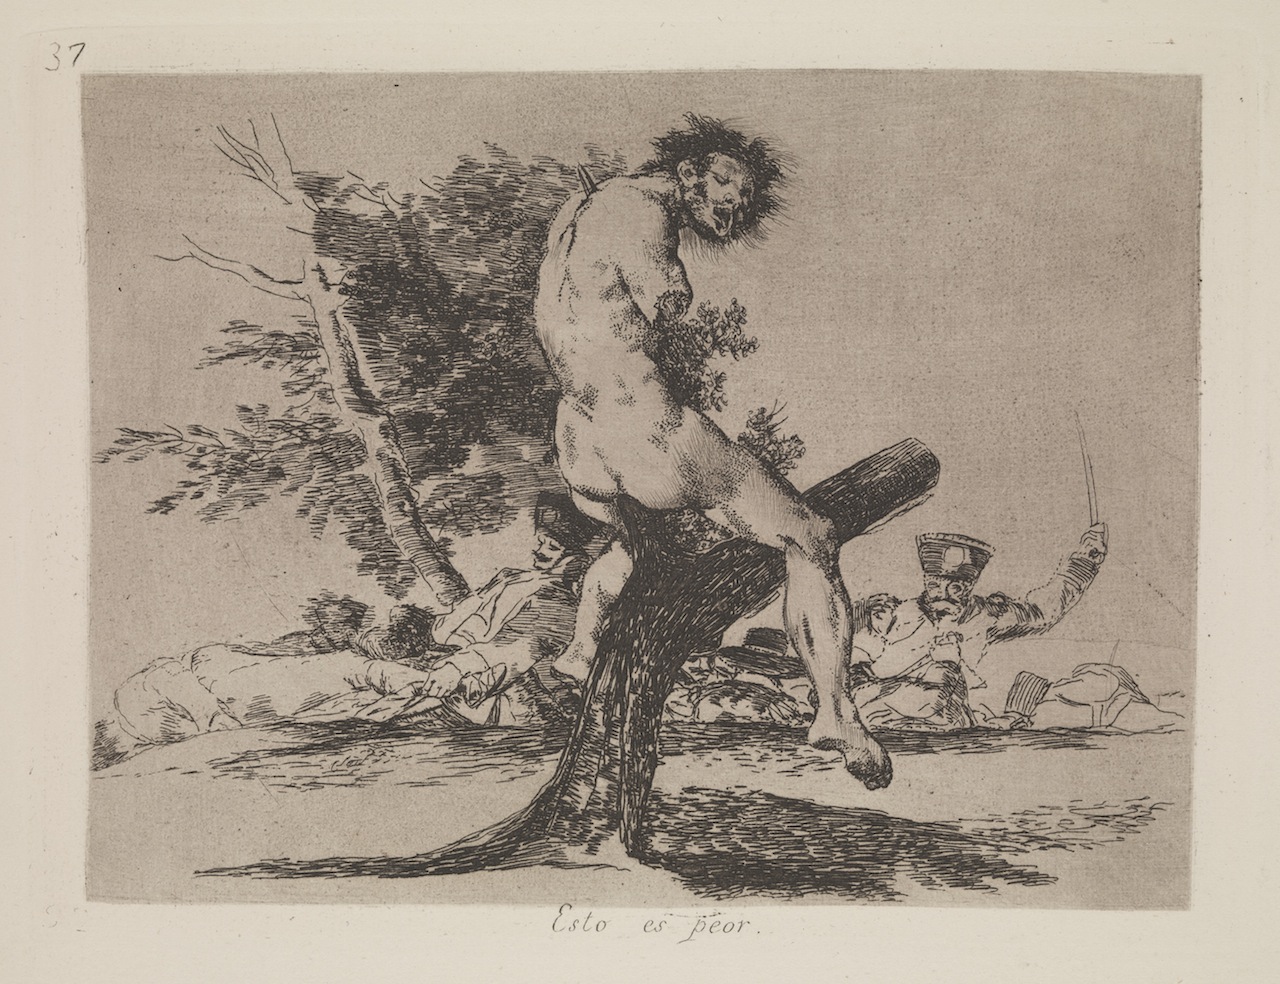 Francisco Goya, from Disasters of War, 1810-20